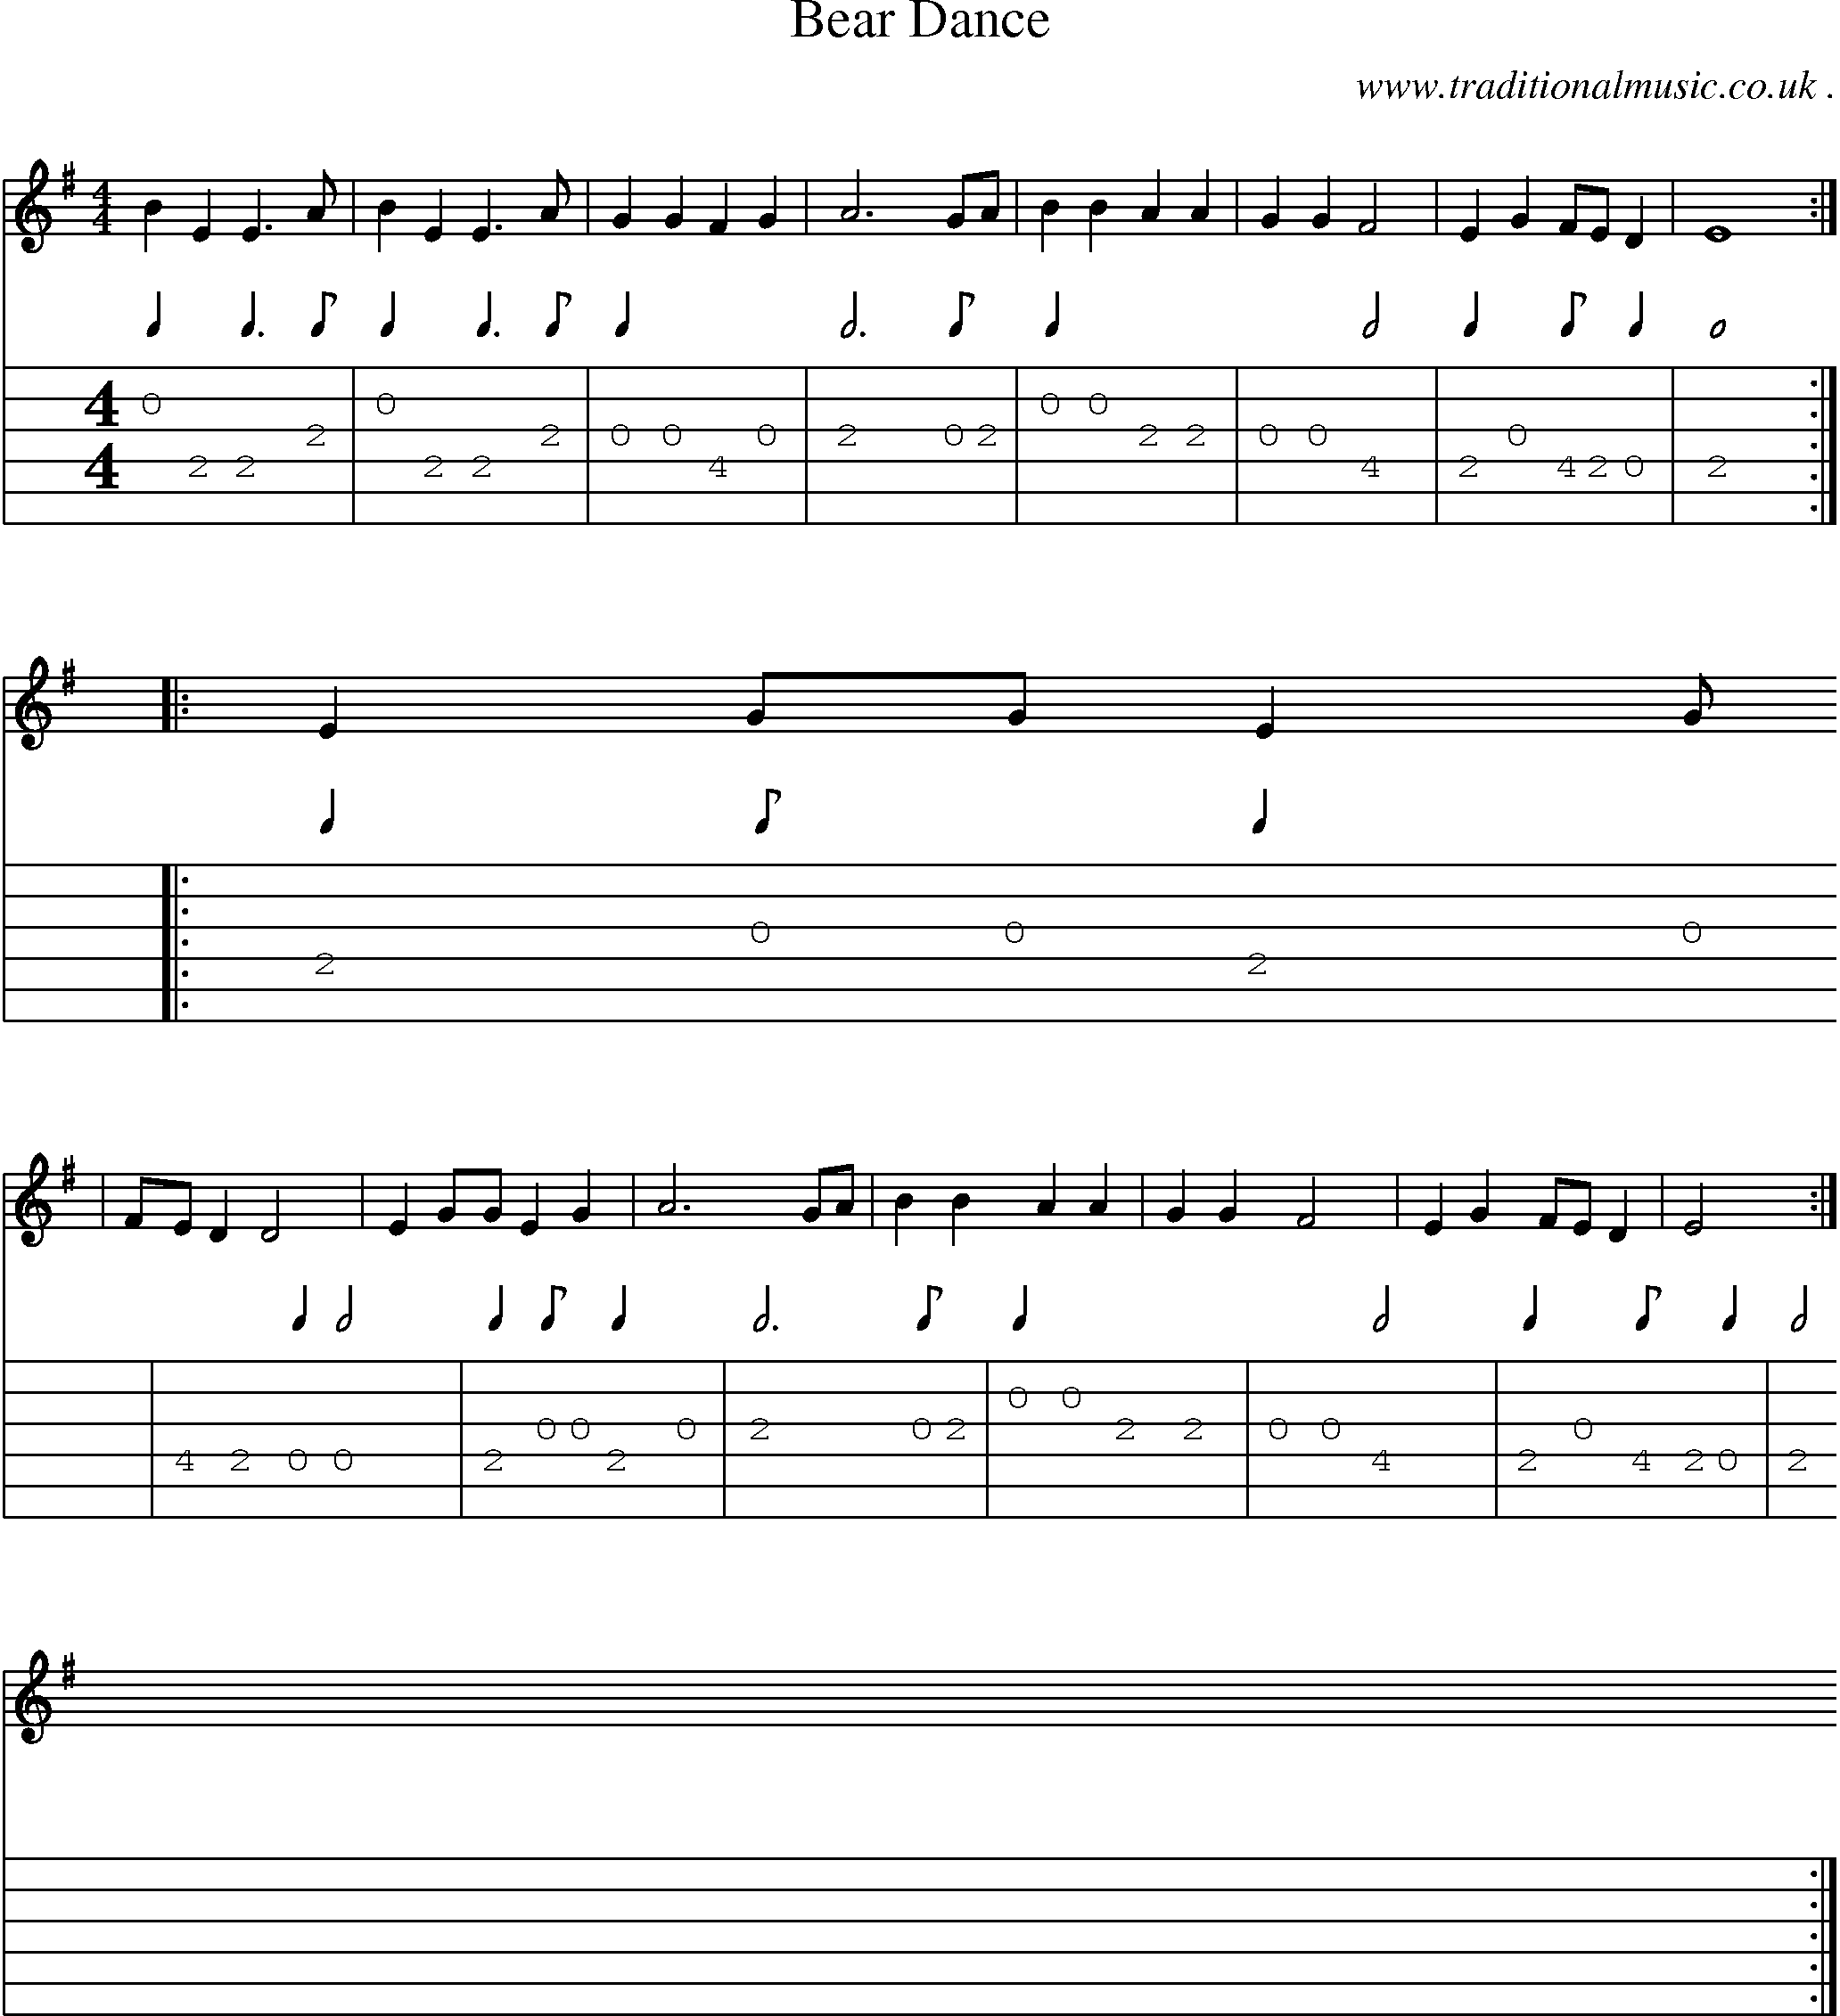 Sheet-Music and Guitar Tabs for Bear Dance